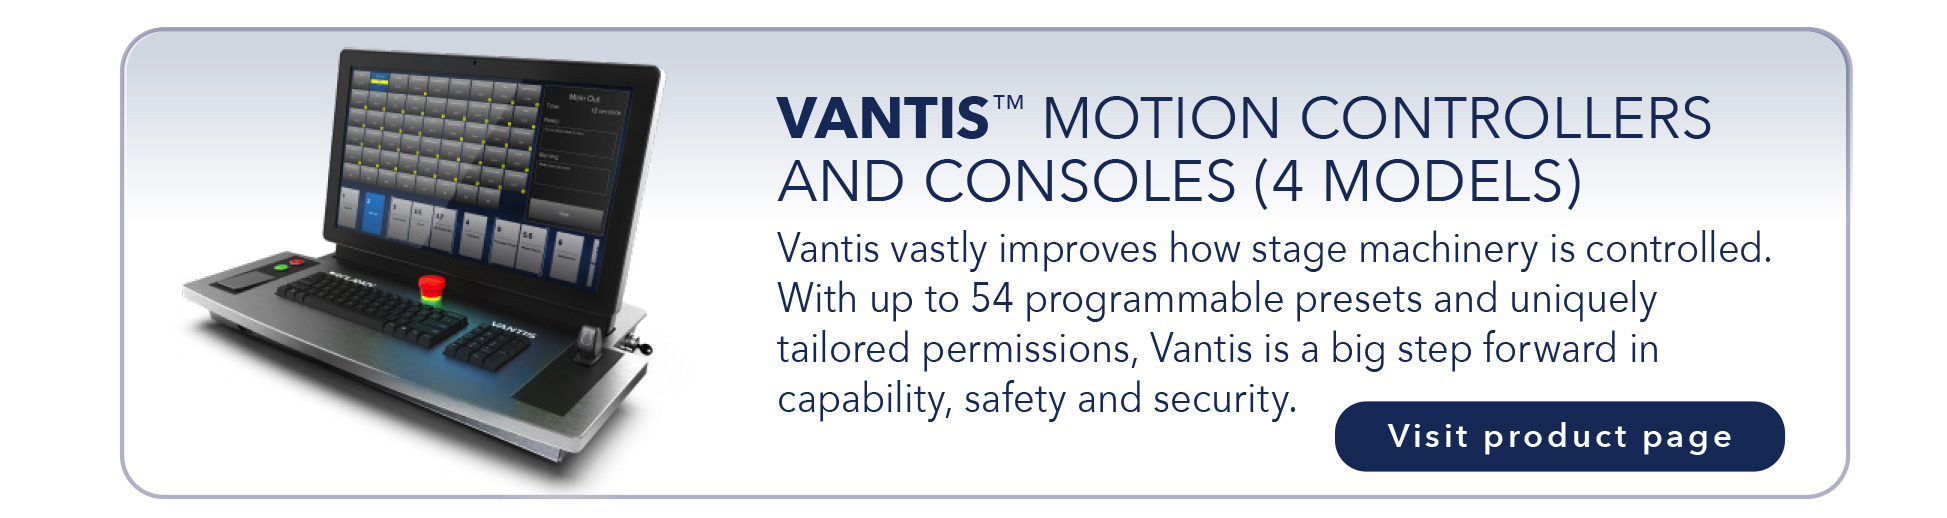 VANTIS™ MOTION CONTROLLERS
AND CONSOLES (4 MODELS)
Vantis vastly improves how stage machinery is controlled.
With up to 54 programmable presets and uniquely
tailored permissions, Vantis is a big step forward in
capability, safety and security.